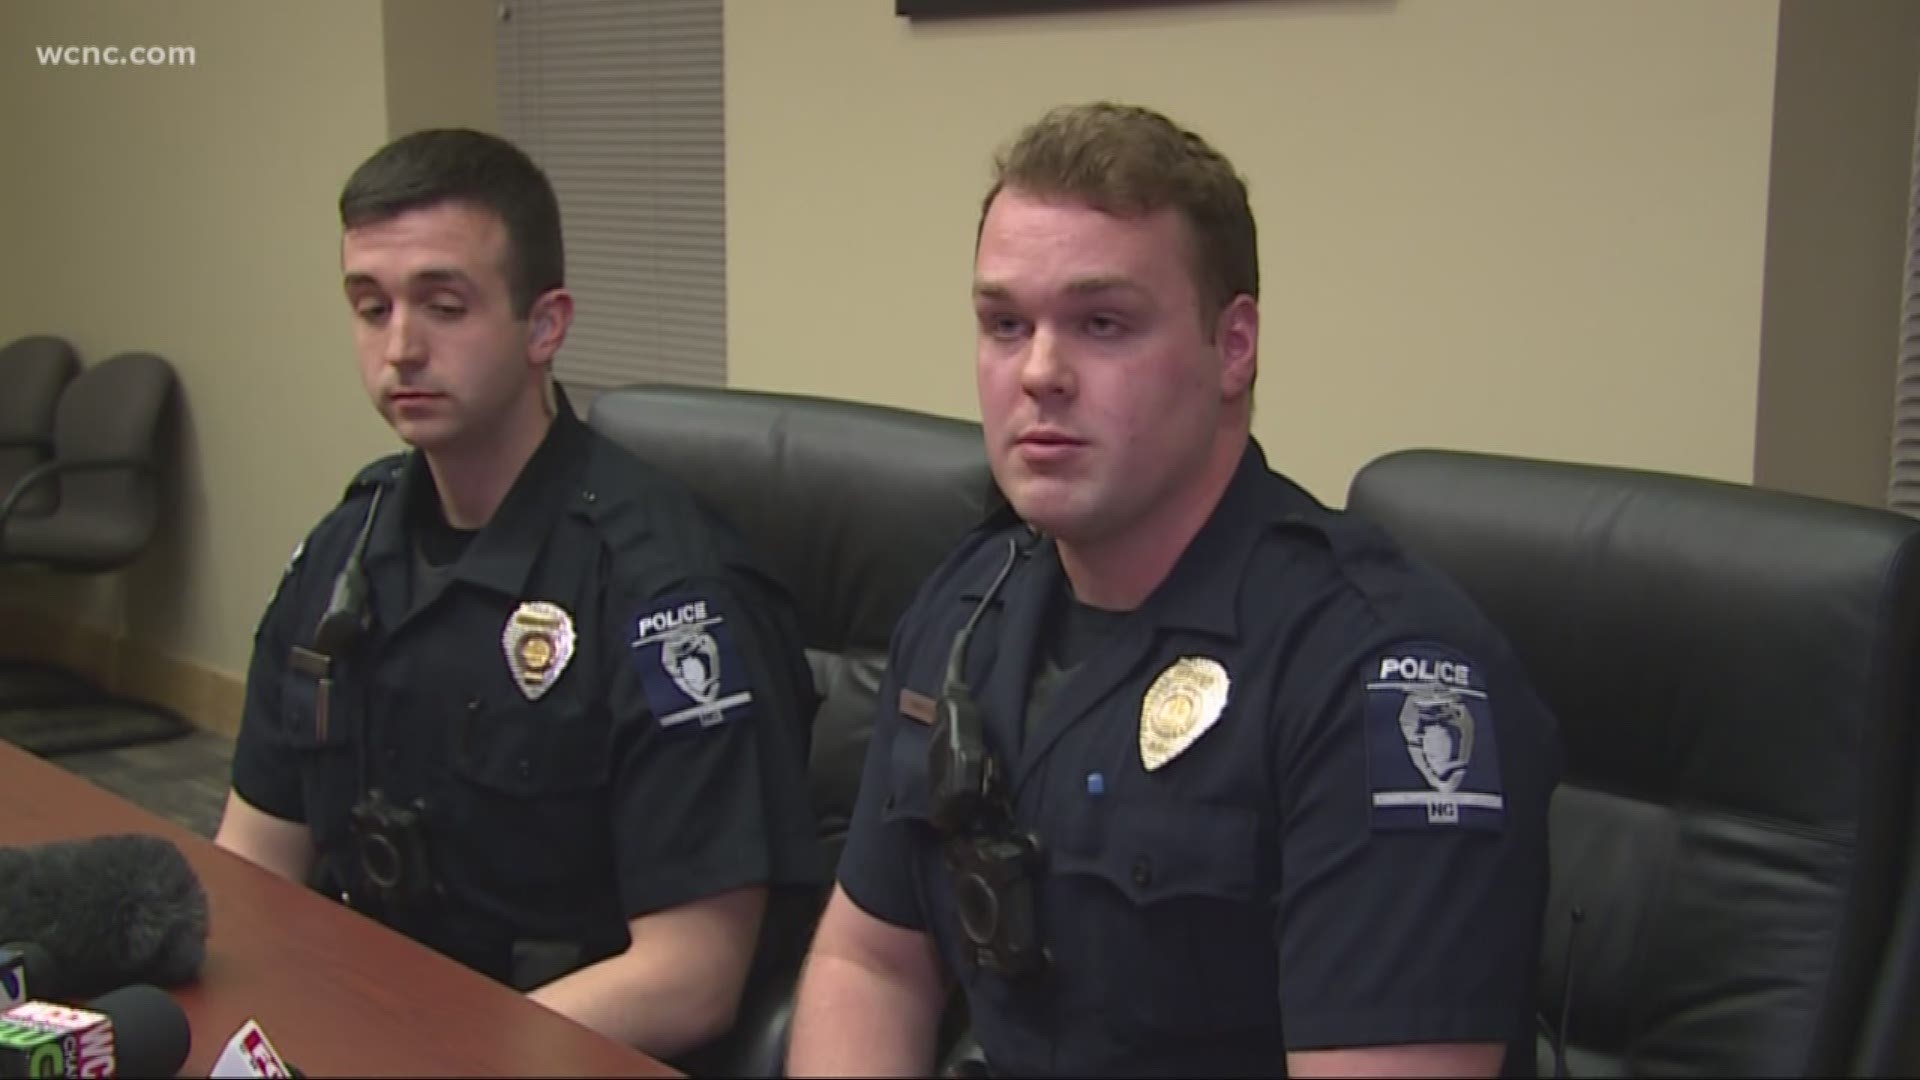 Officers use tourniquet to save boy's life